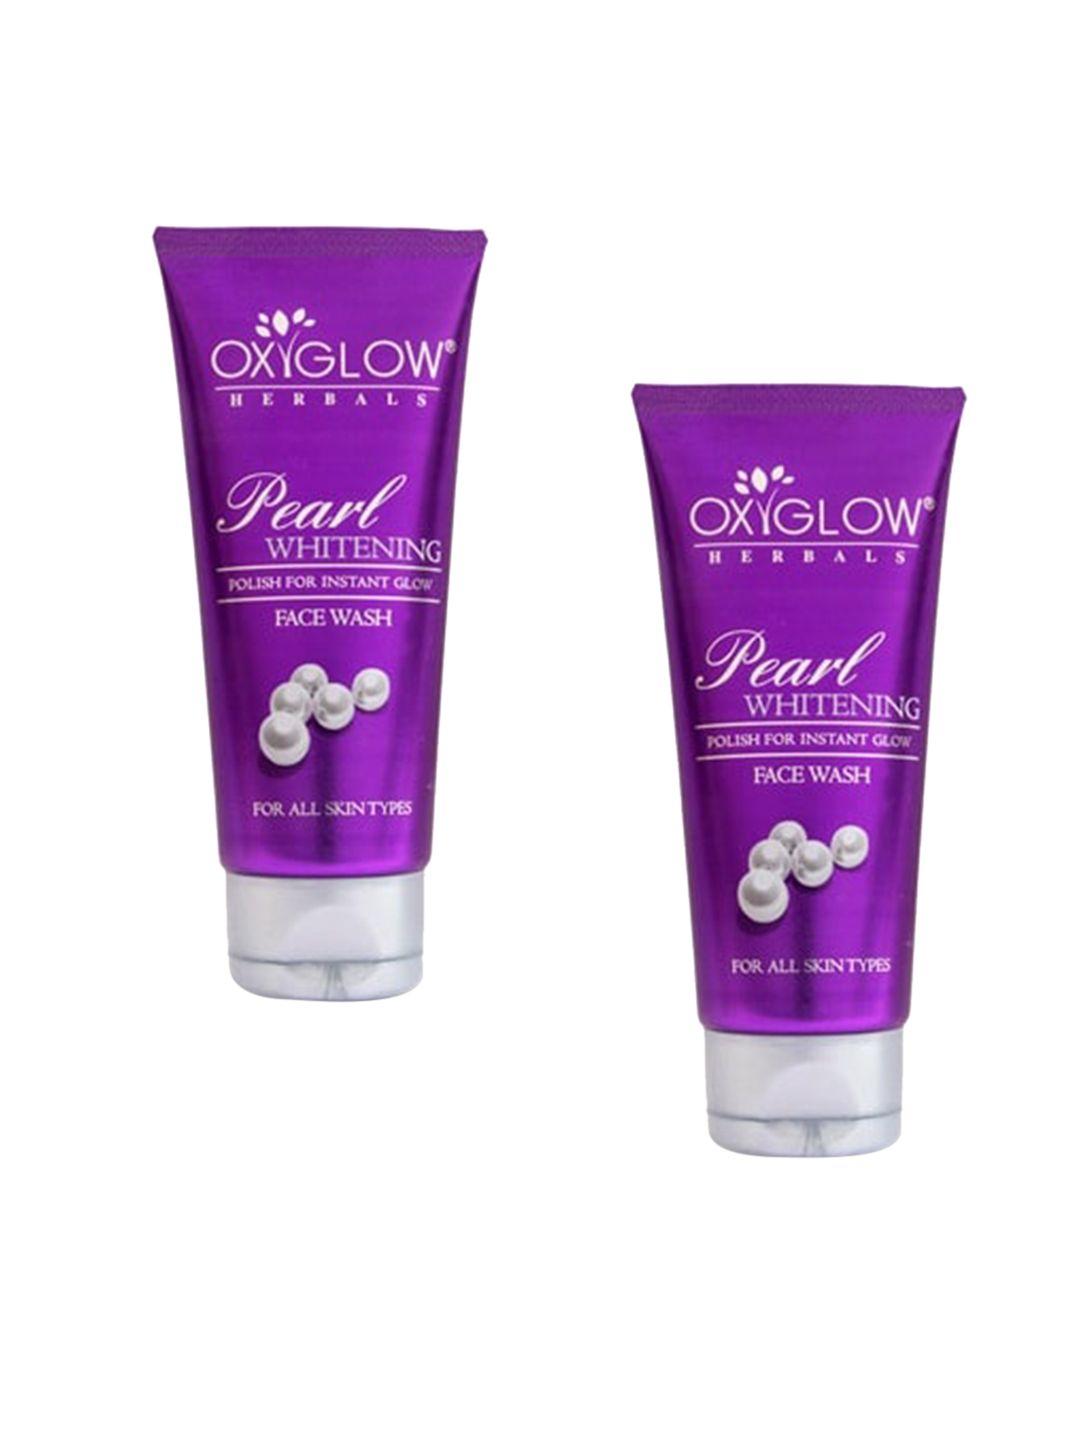 oxyglow set of 2 pearl whitening face washes - 100ml each